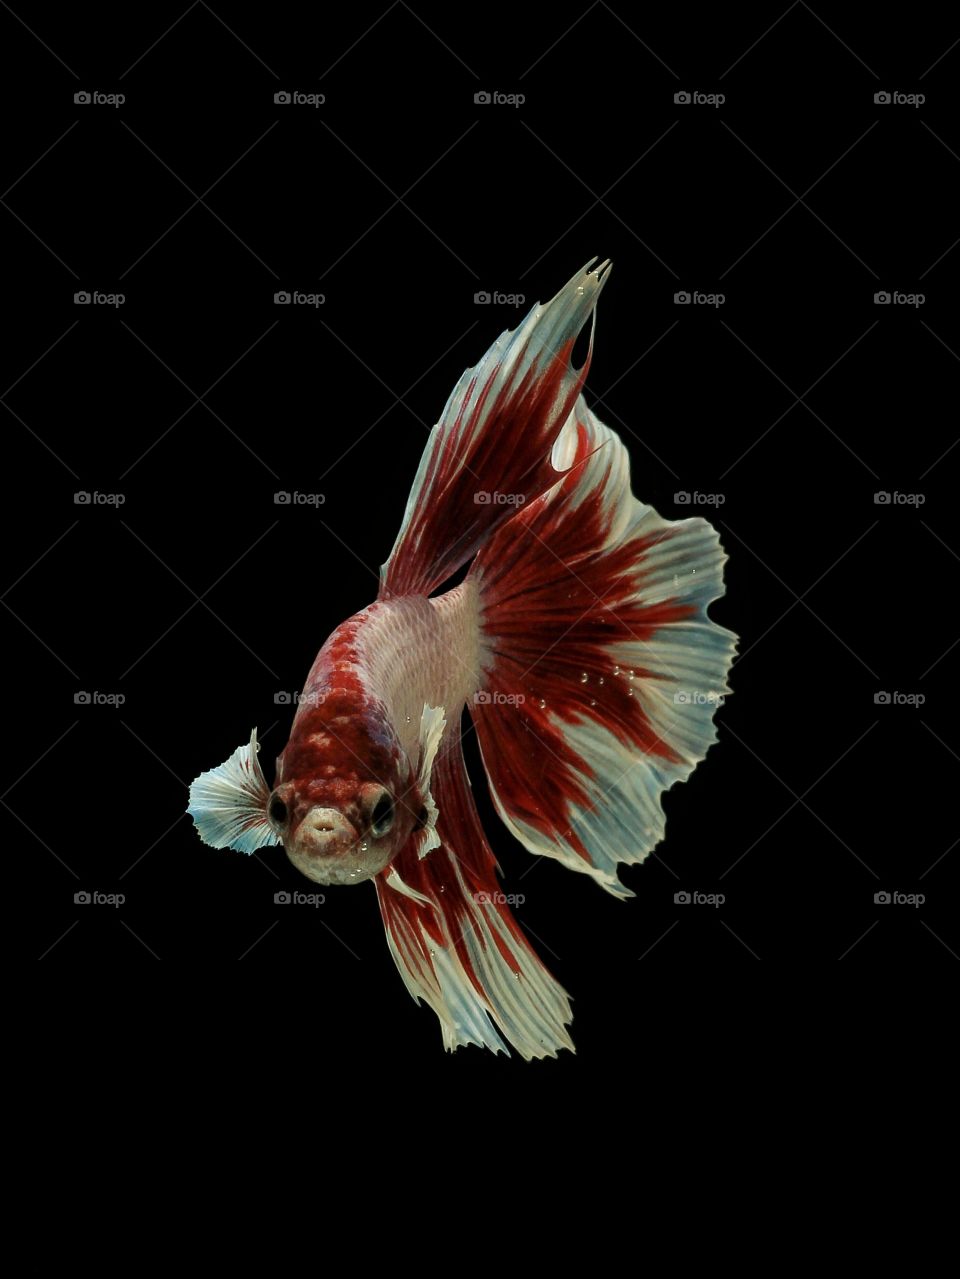 LOOK AT ME
HALFMOON BETTAFISH
WITH BLACK OR DARK BACKGROUND THE COLOUR IS ALL OUT